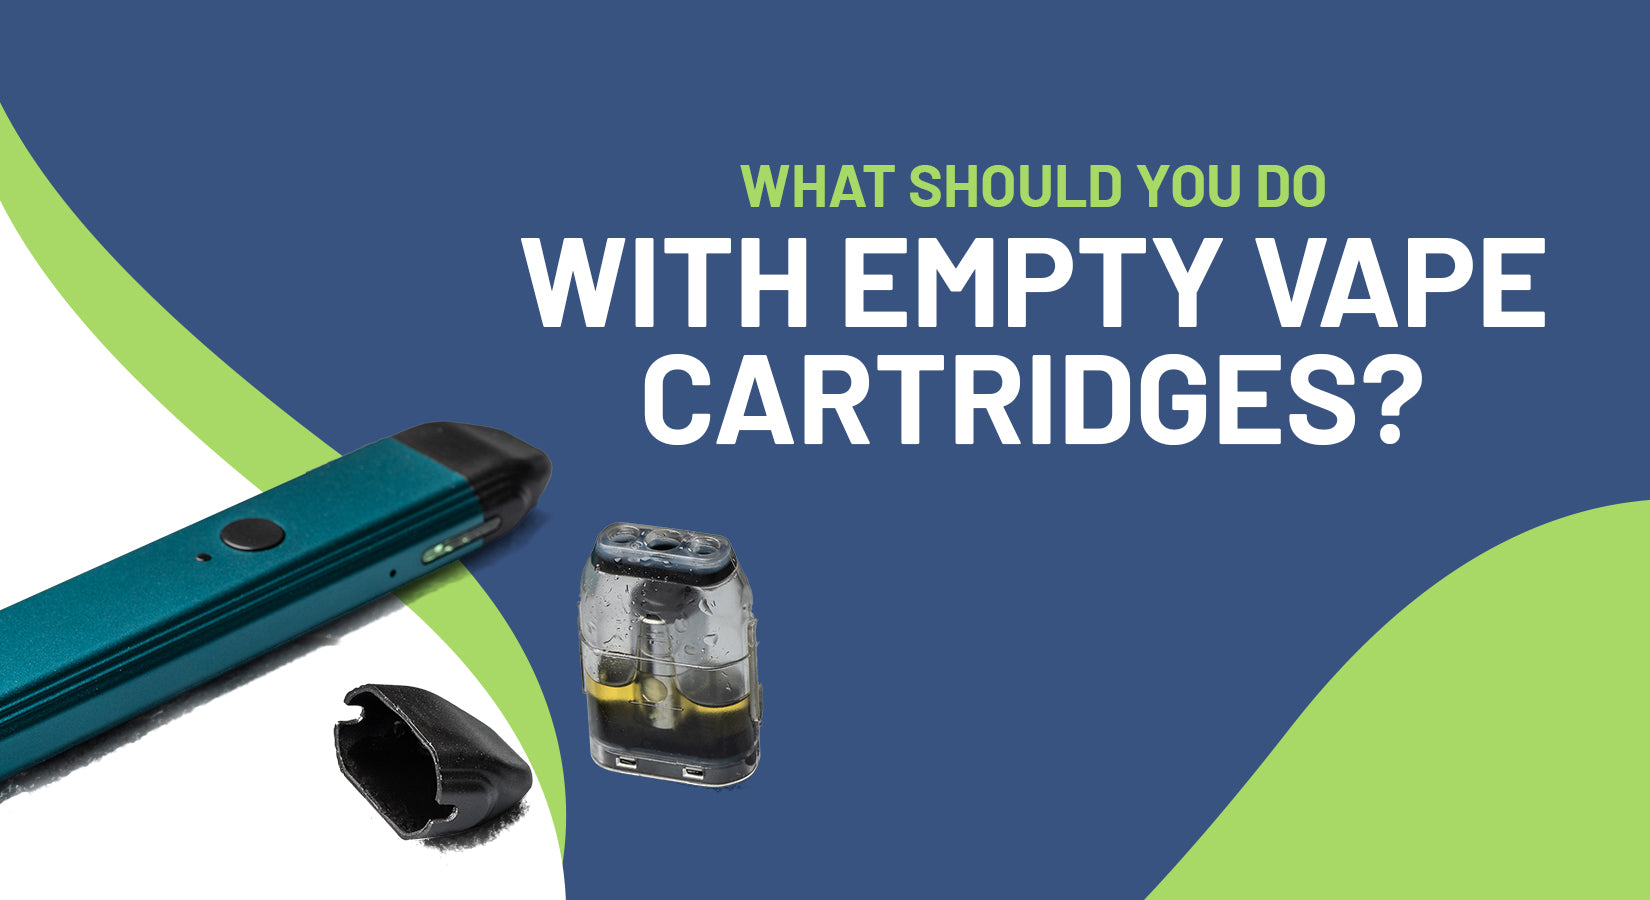 What Should You Do With Empty Vape Cartridges?